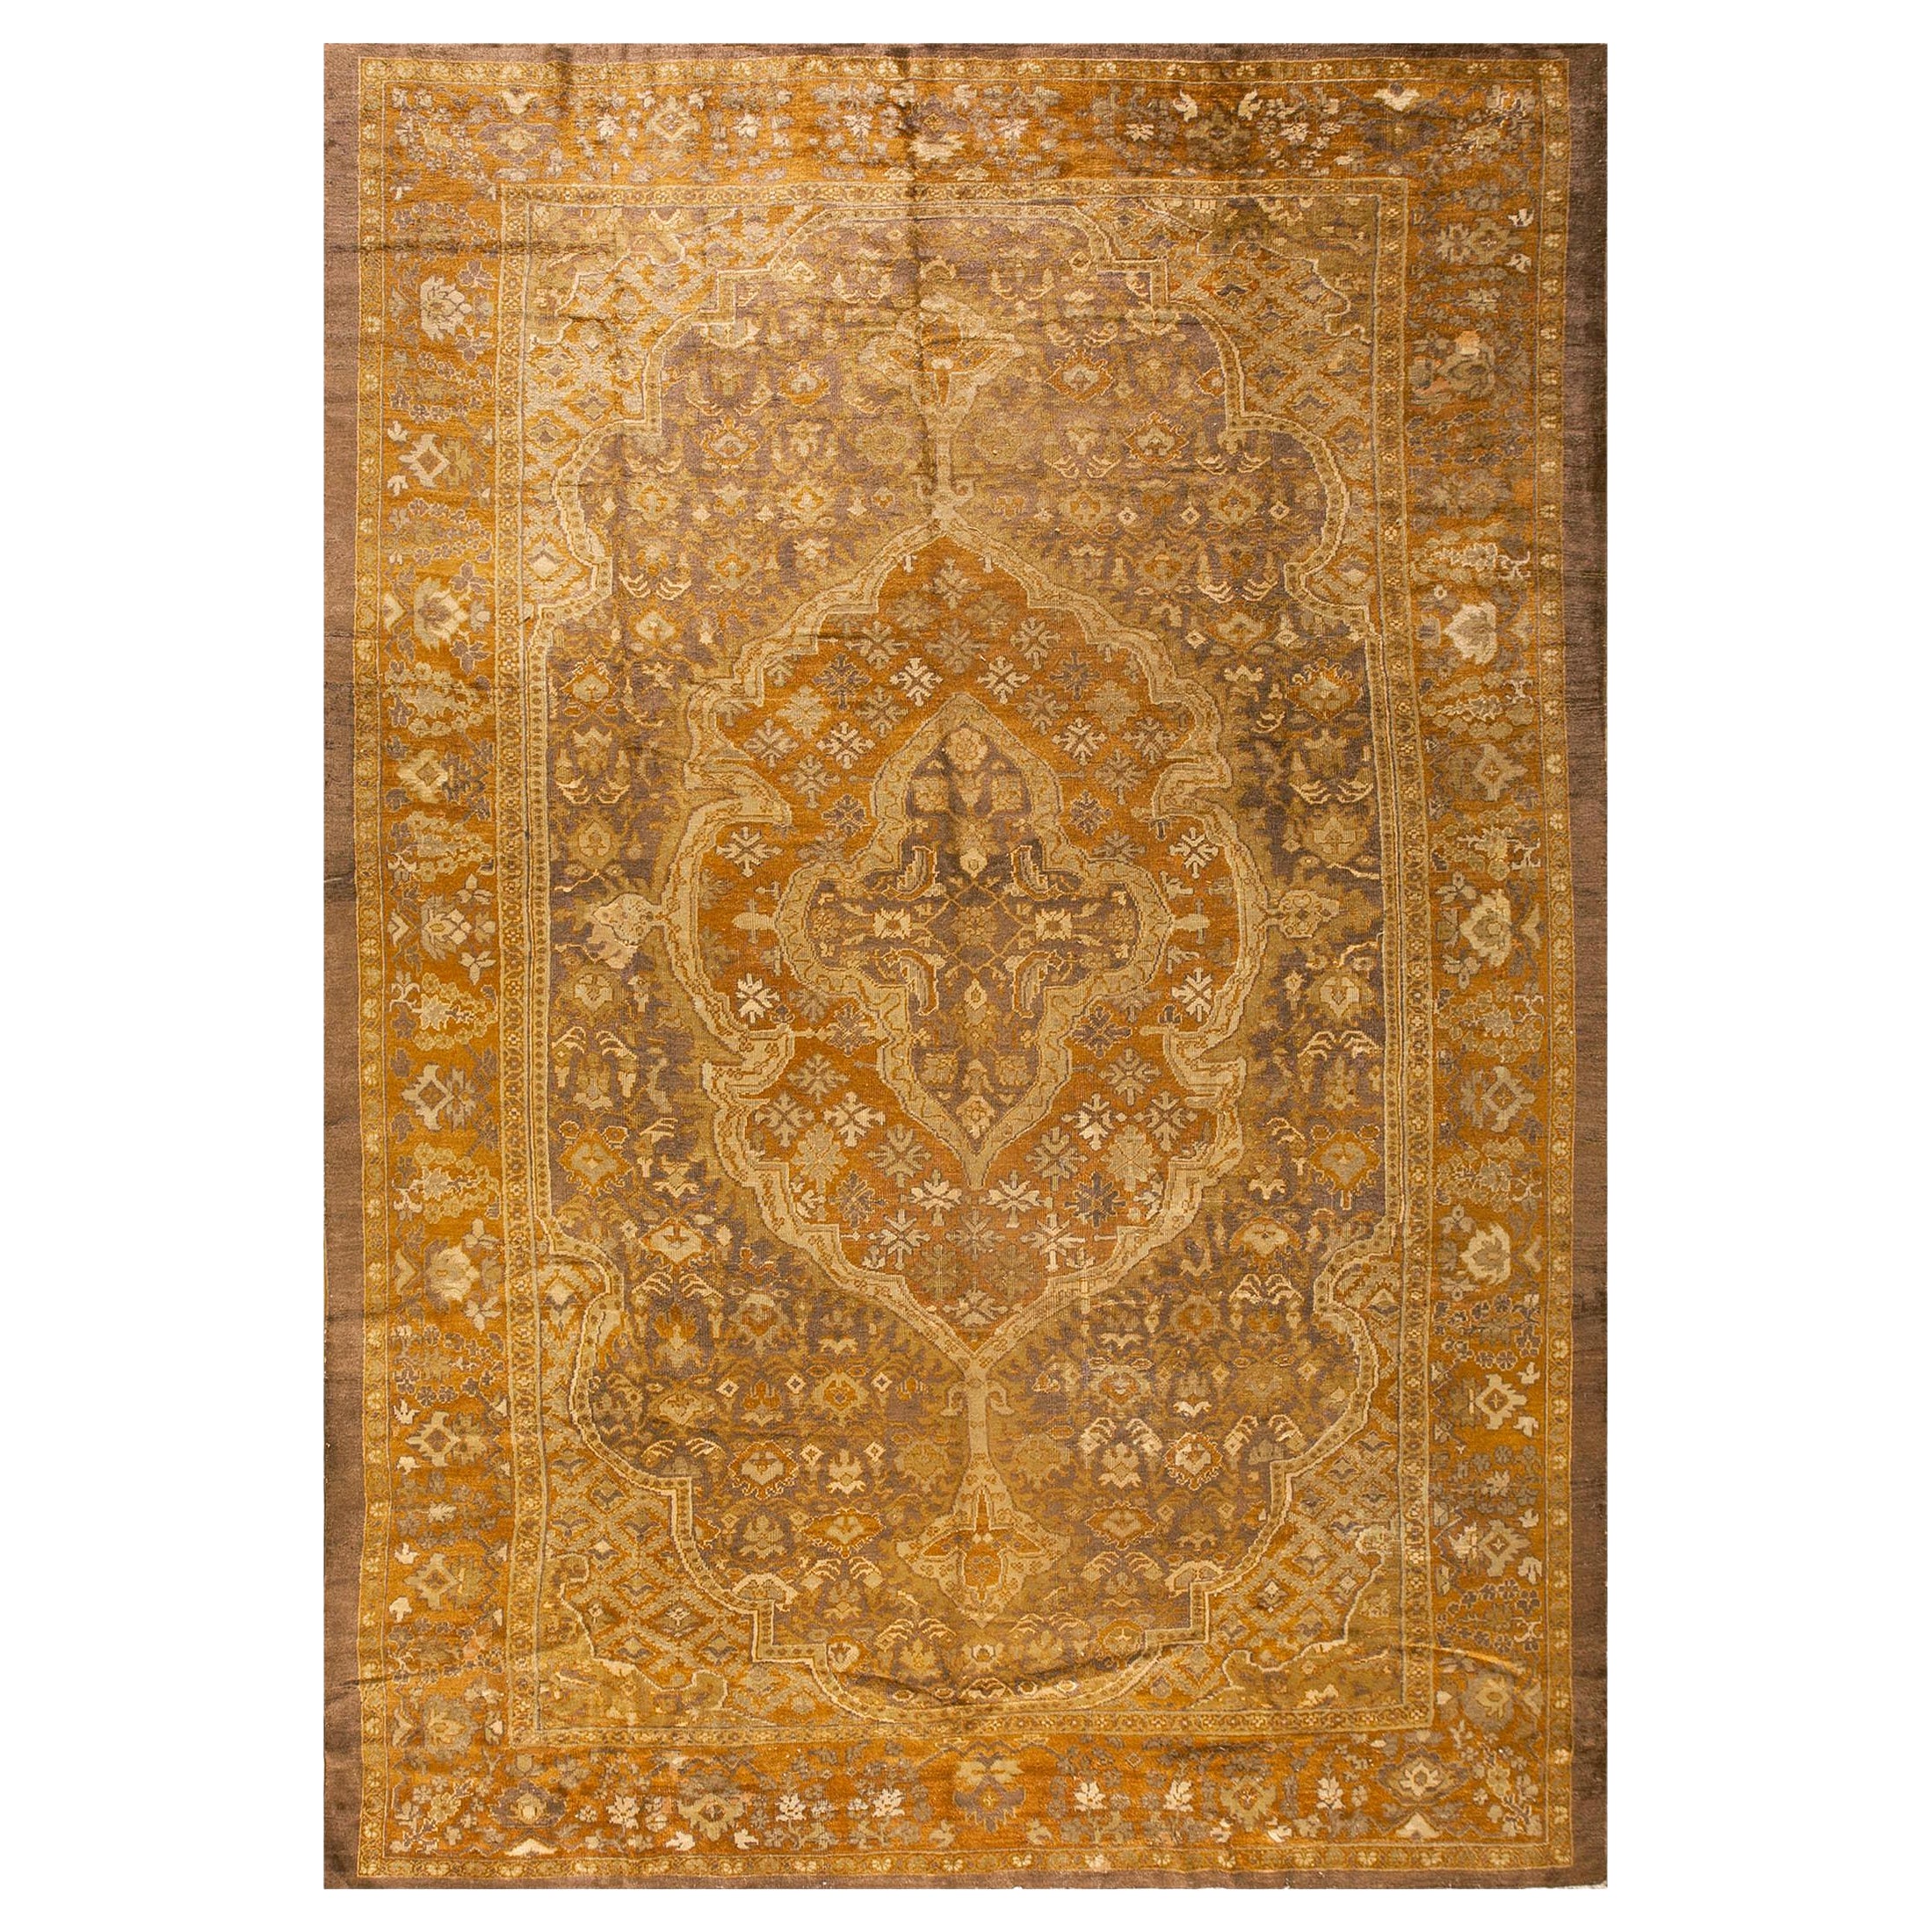 Early 20th Century Persian Sultanabad Carpet ( 10' x 13'6''- 305 x 410 )